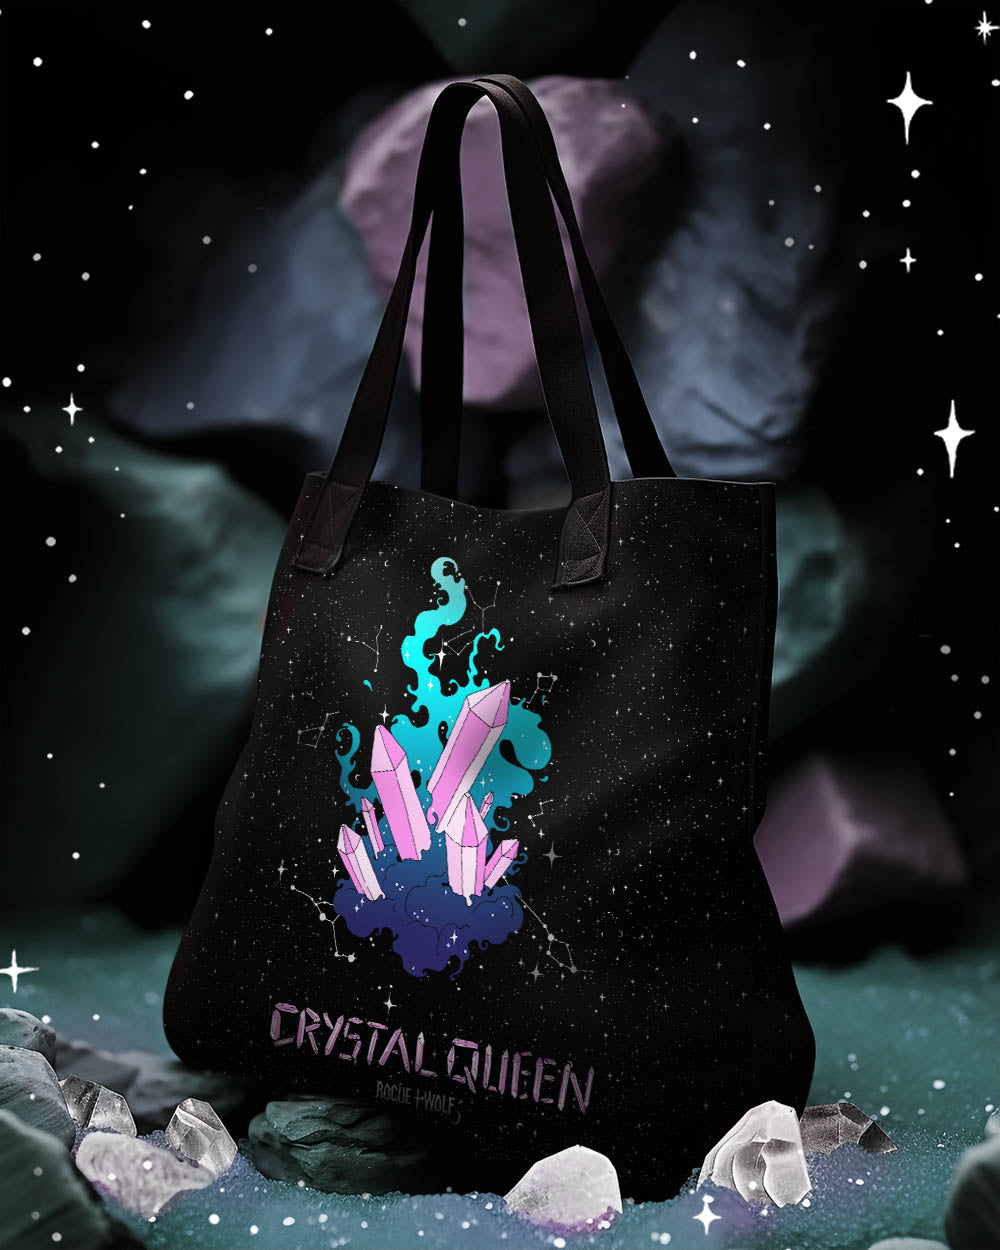 Crystal Queen Cotton Vegan Tote Bag - Witchy Goth Large Foldable & Reusable Bag for Travel Work Gym Grocery Cool Gothic Gifts